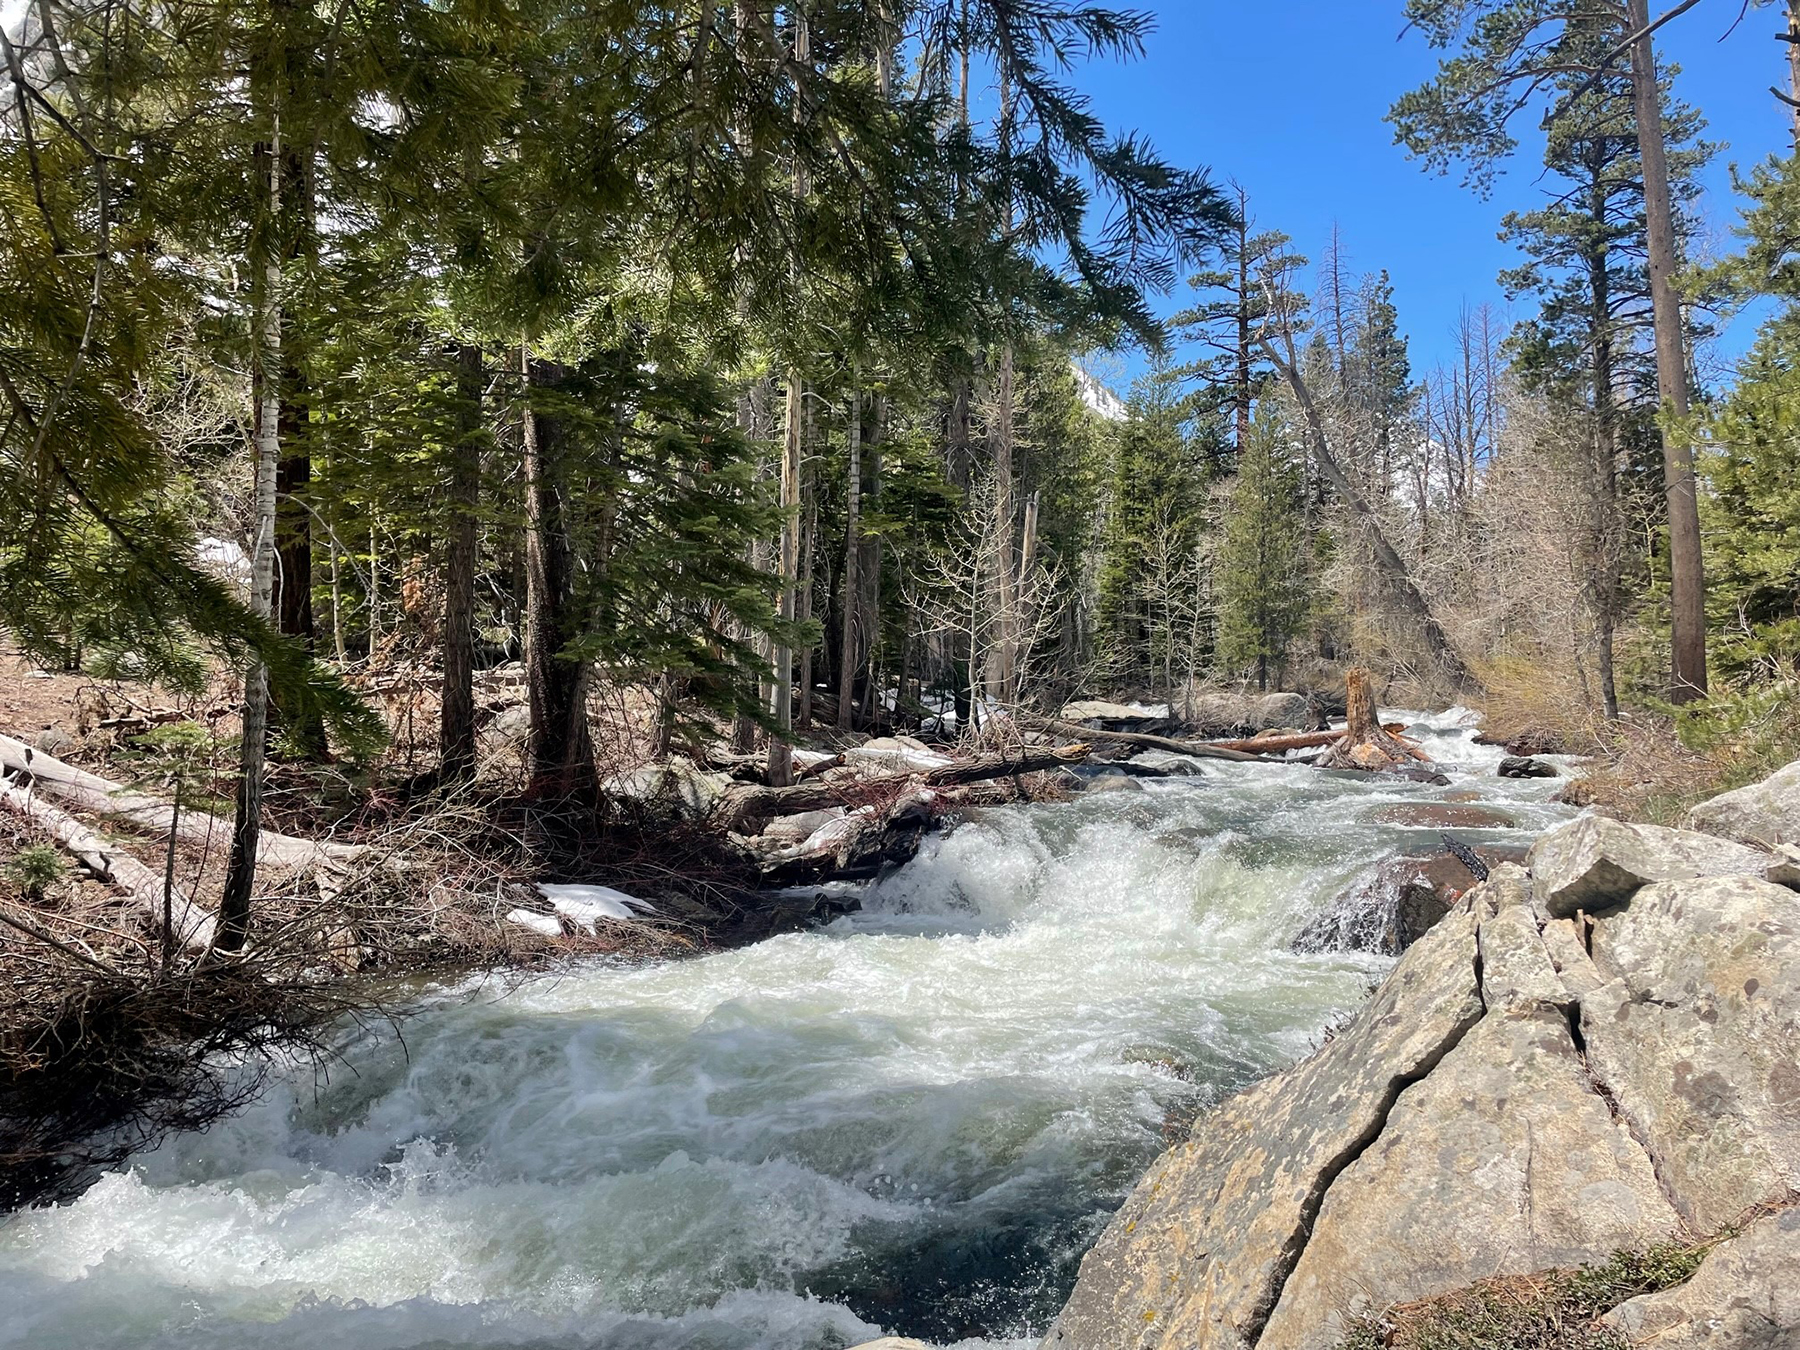 A key tributary to Mono Lake, Lee Vining Creek is one of two streams in the Mono Basin that the Los Angeles Department of Water and Power may still divert for purposes of water supply. (Photograph courtesy of the Mono Lake Committee)